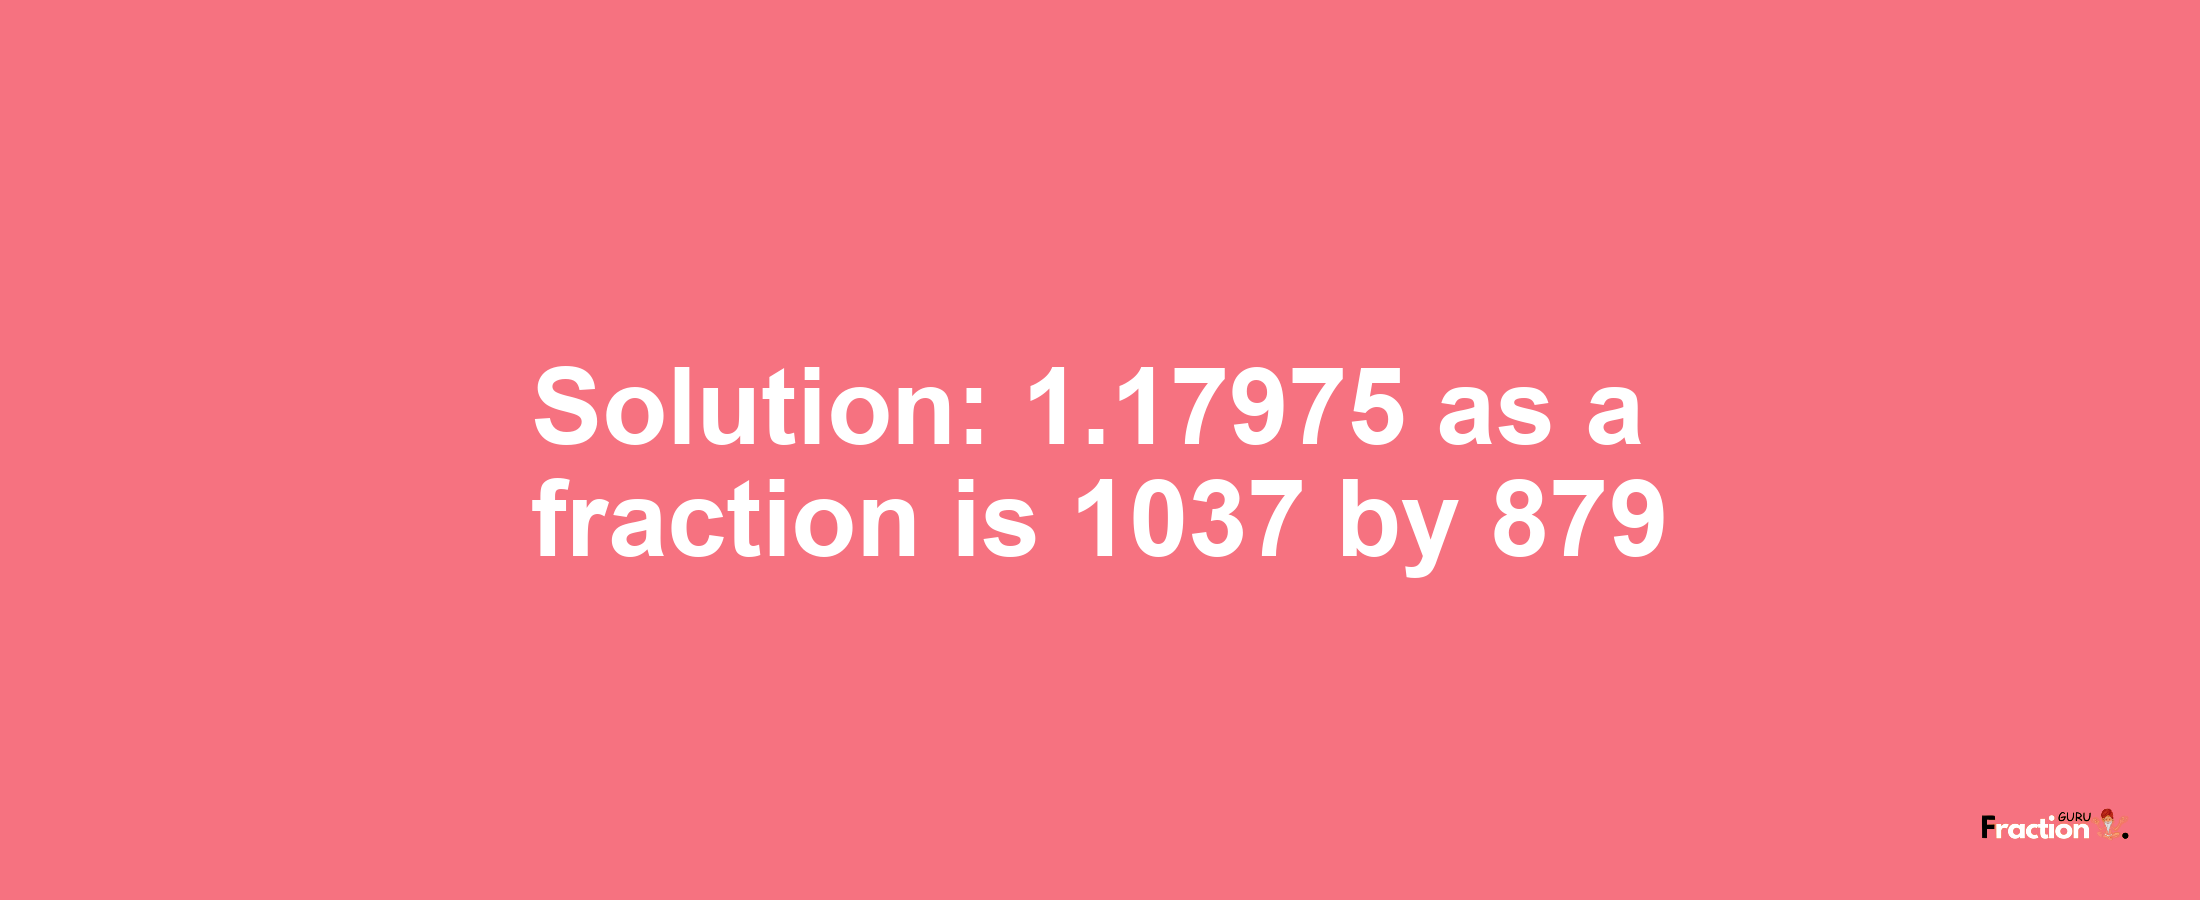 Solution:1.17975 as a fraction is 1037/879